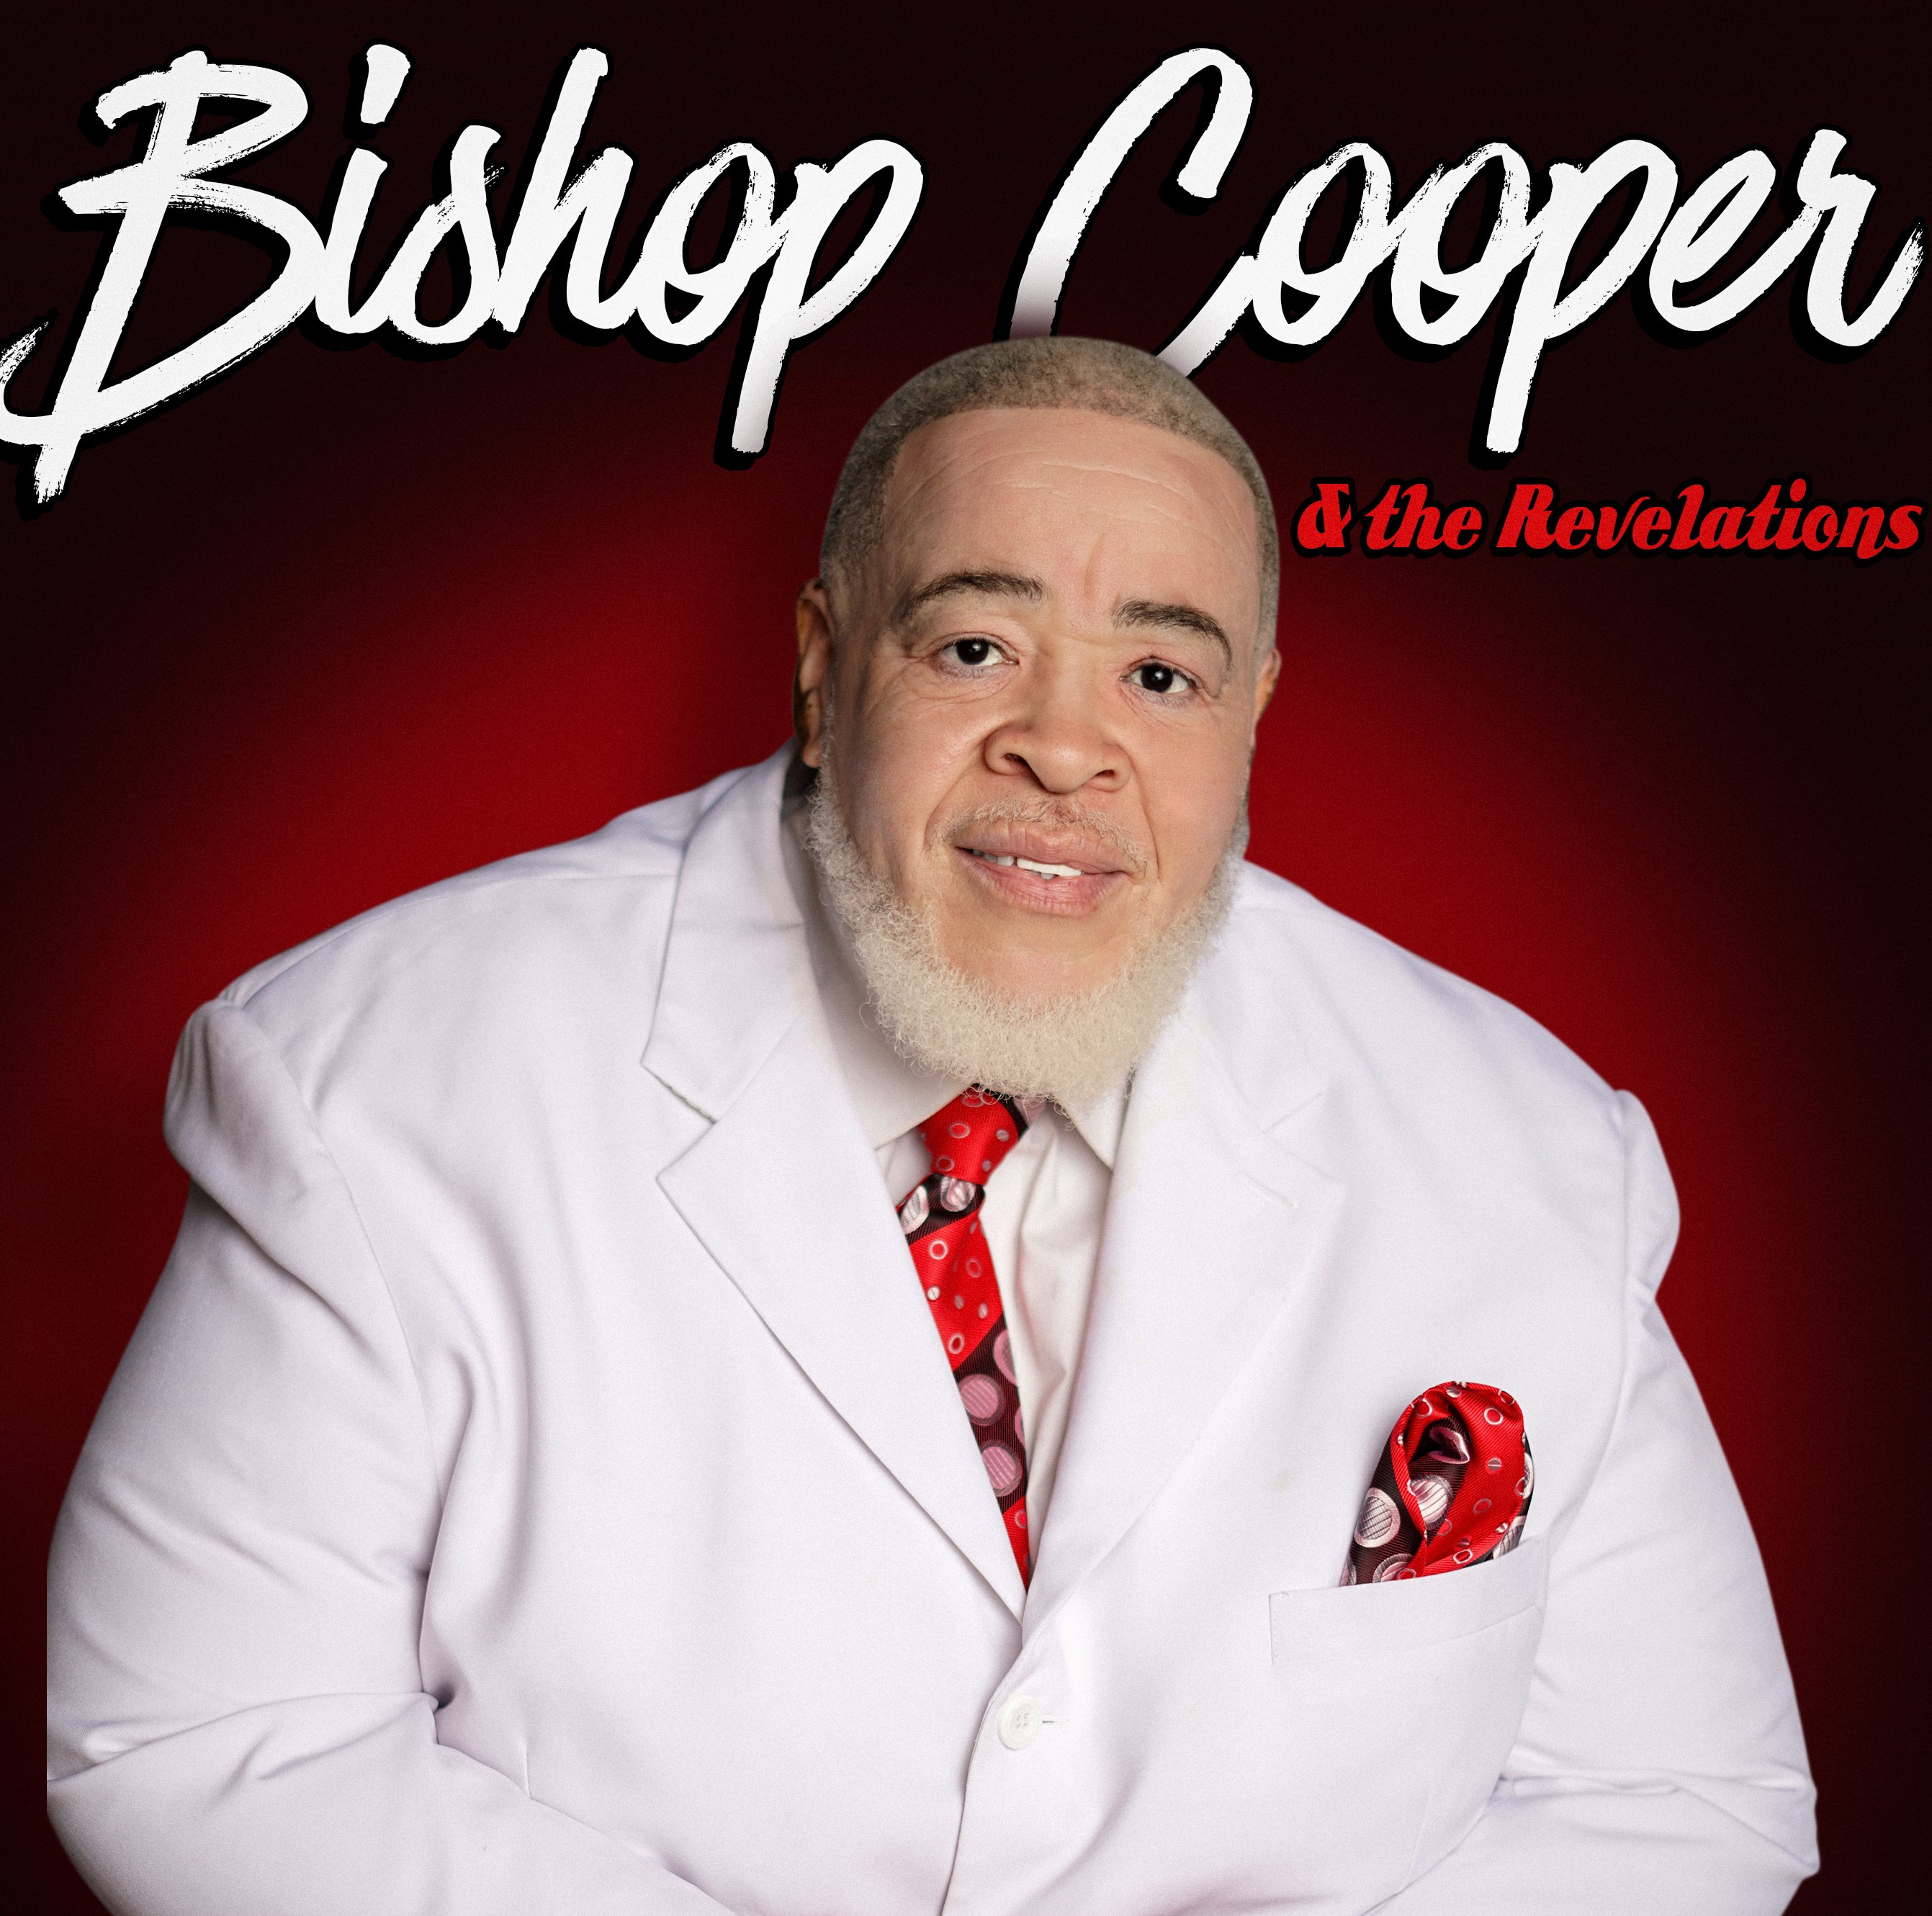 Illuminating Life with Powerful, Moving & Touching Music - Bishop Cooper & the Revelations Stun with New Gospel Single